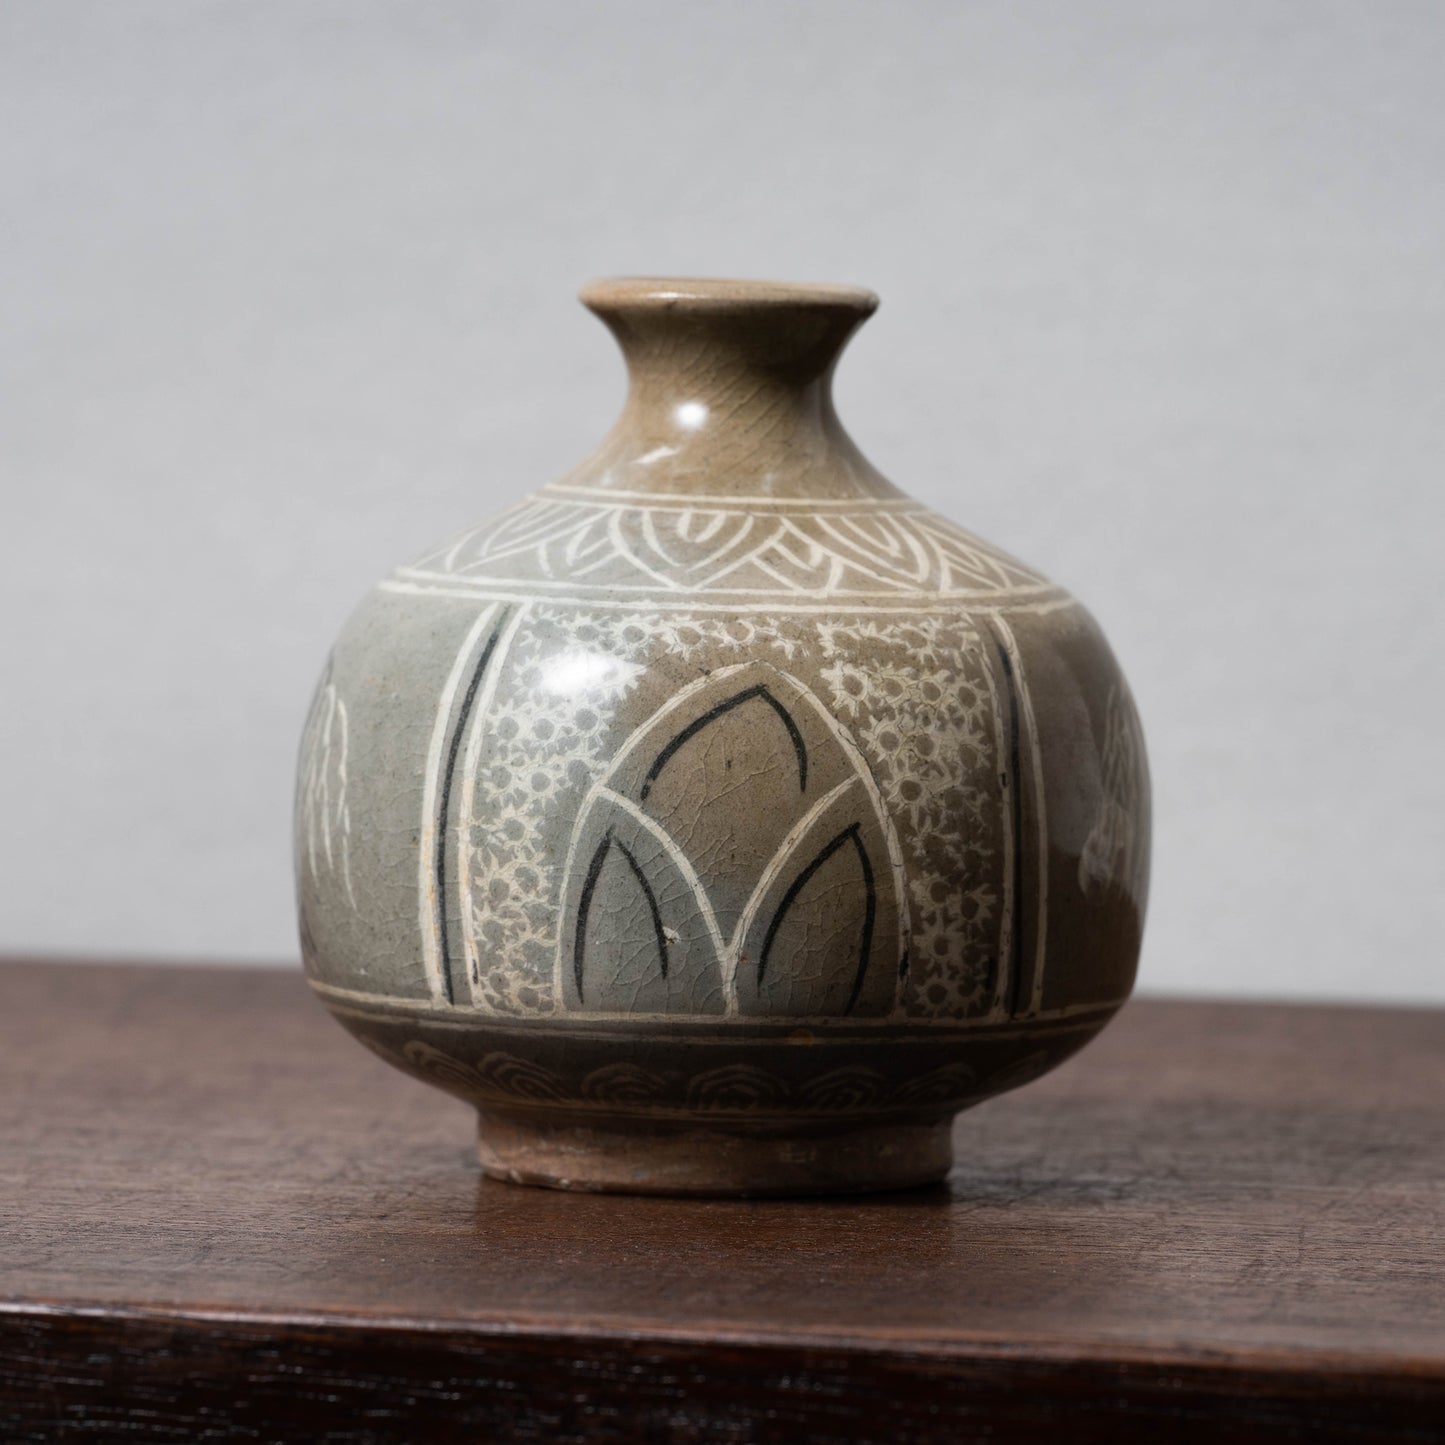 Joseon Dynasty Celadon Bottle with Inlaid Willow and Flower Design